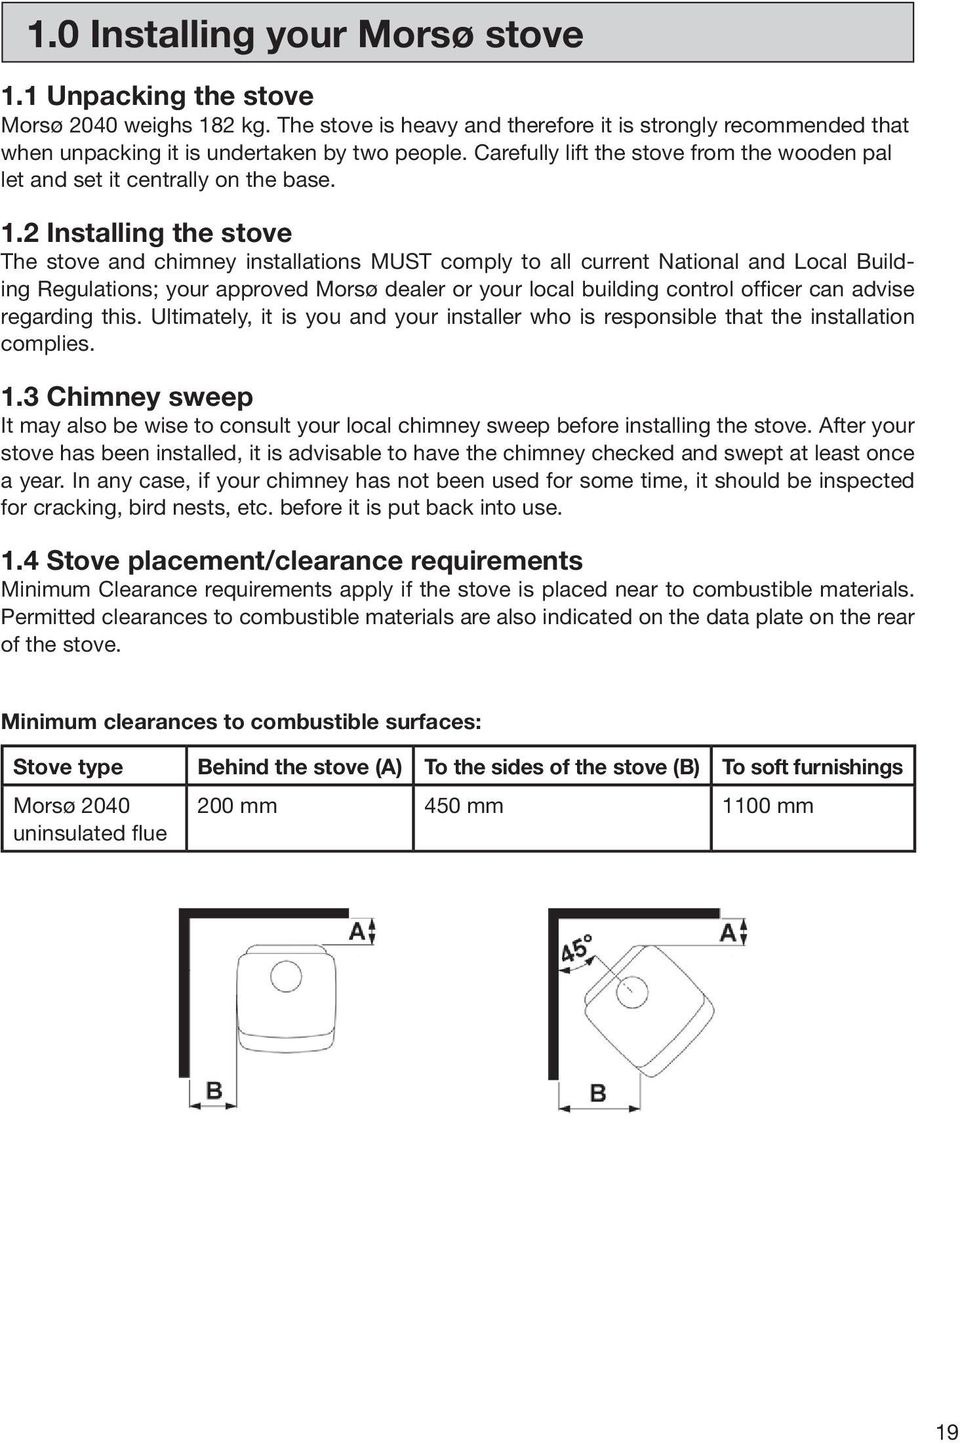 2 Installing the stove The stove and chimney installations MUST comply to all current National and Local Building Regulations; your approved Morsø dealer or your local building control officer can